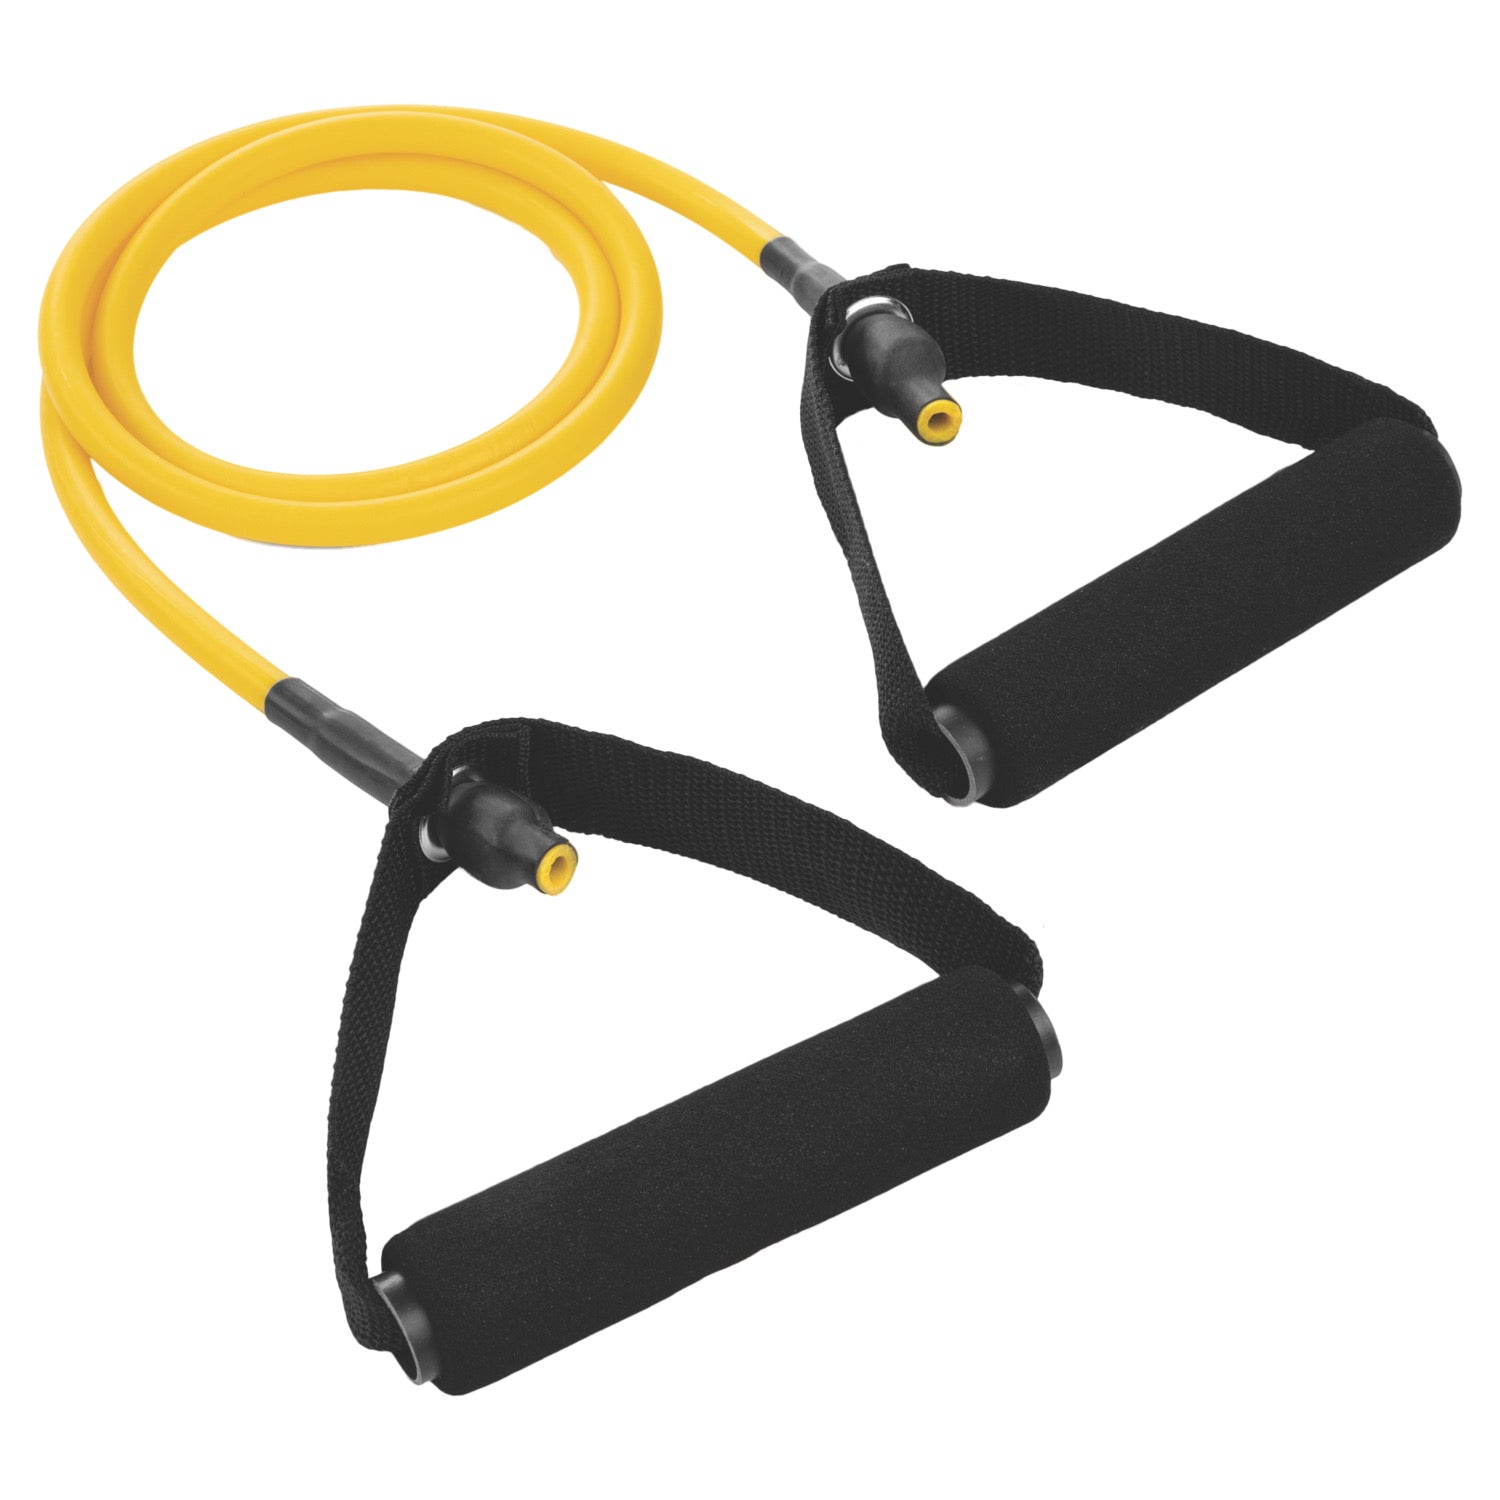 XF Resistance Tubing with Foam Handles Series RHINO Fitness __label:NEW! Fitness Physical Therapy Resistance Training Tubing